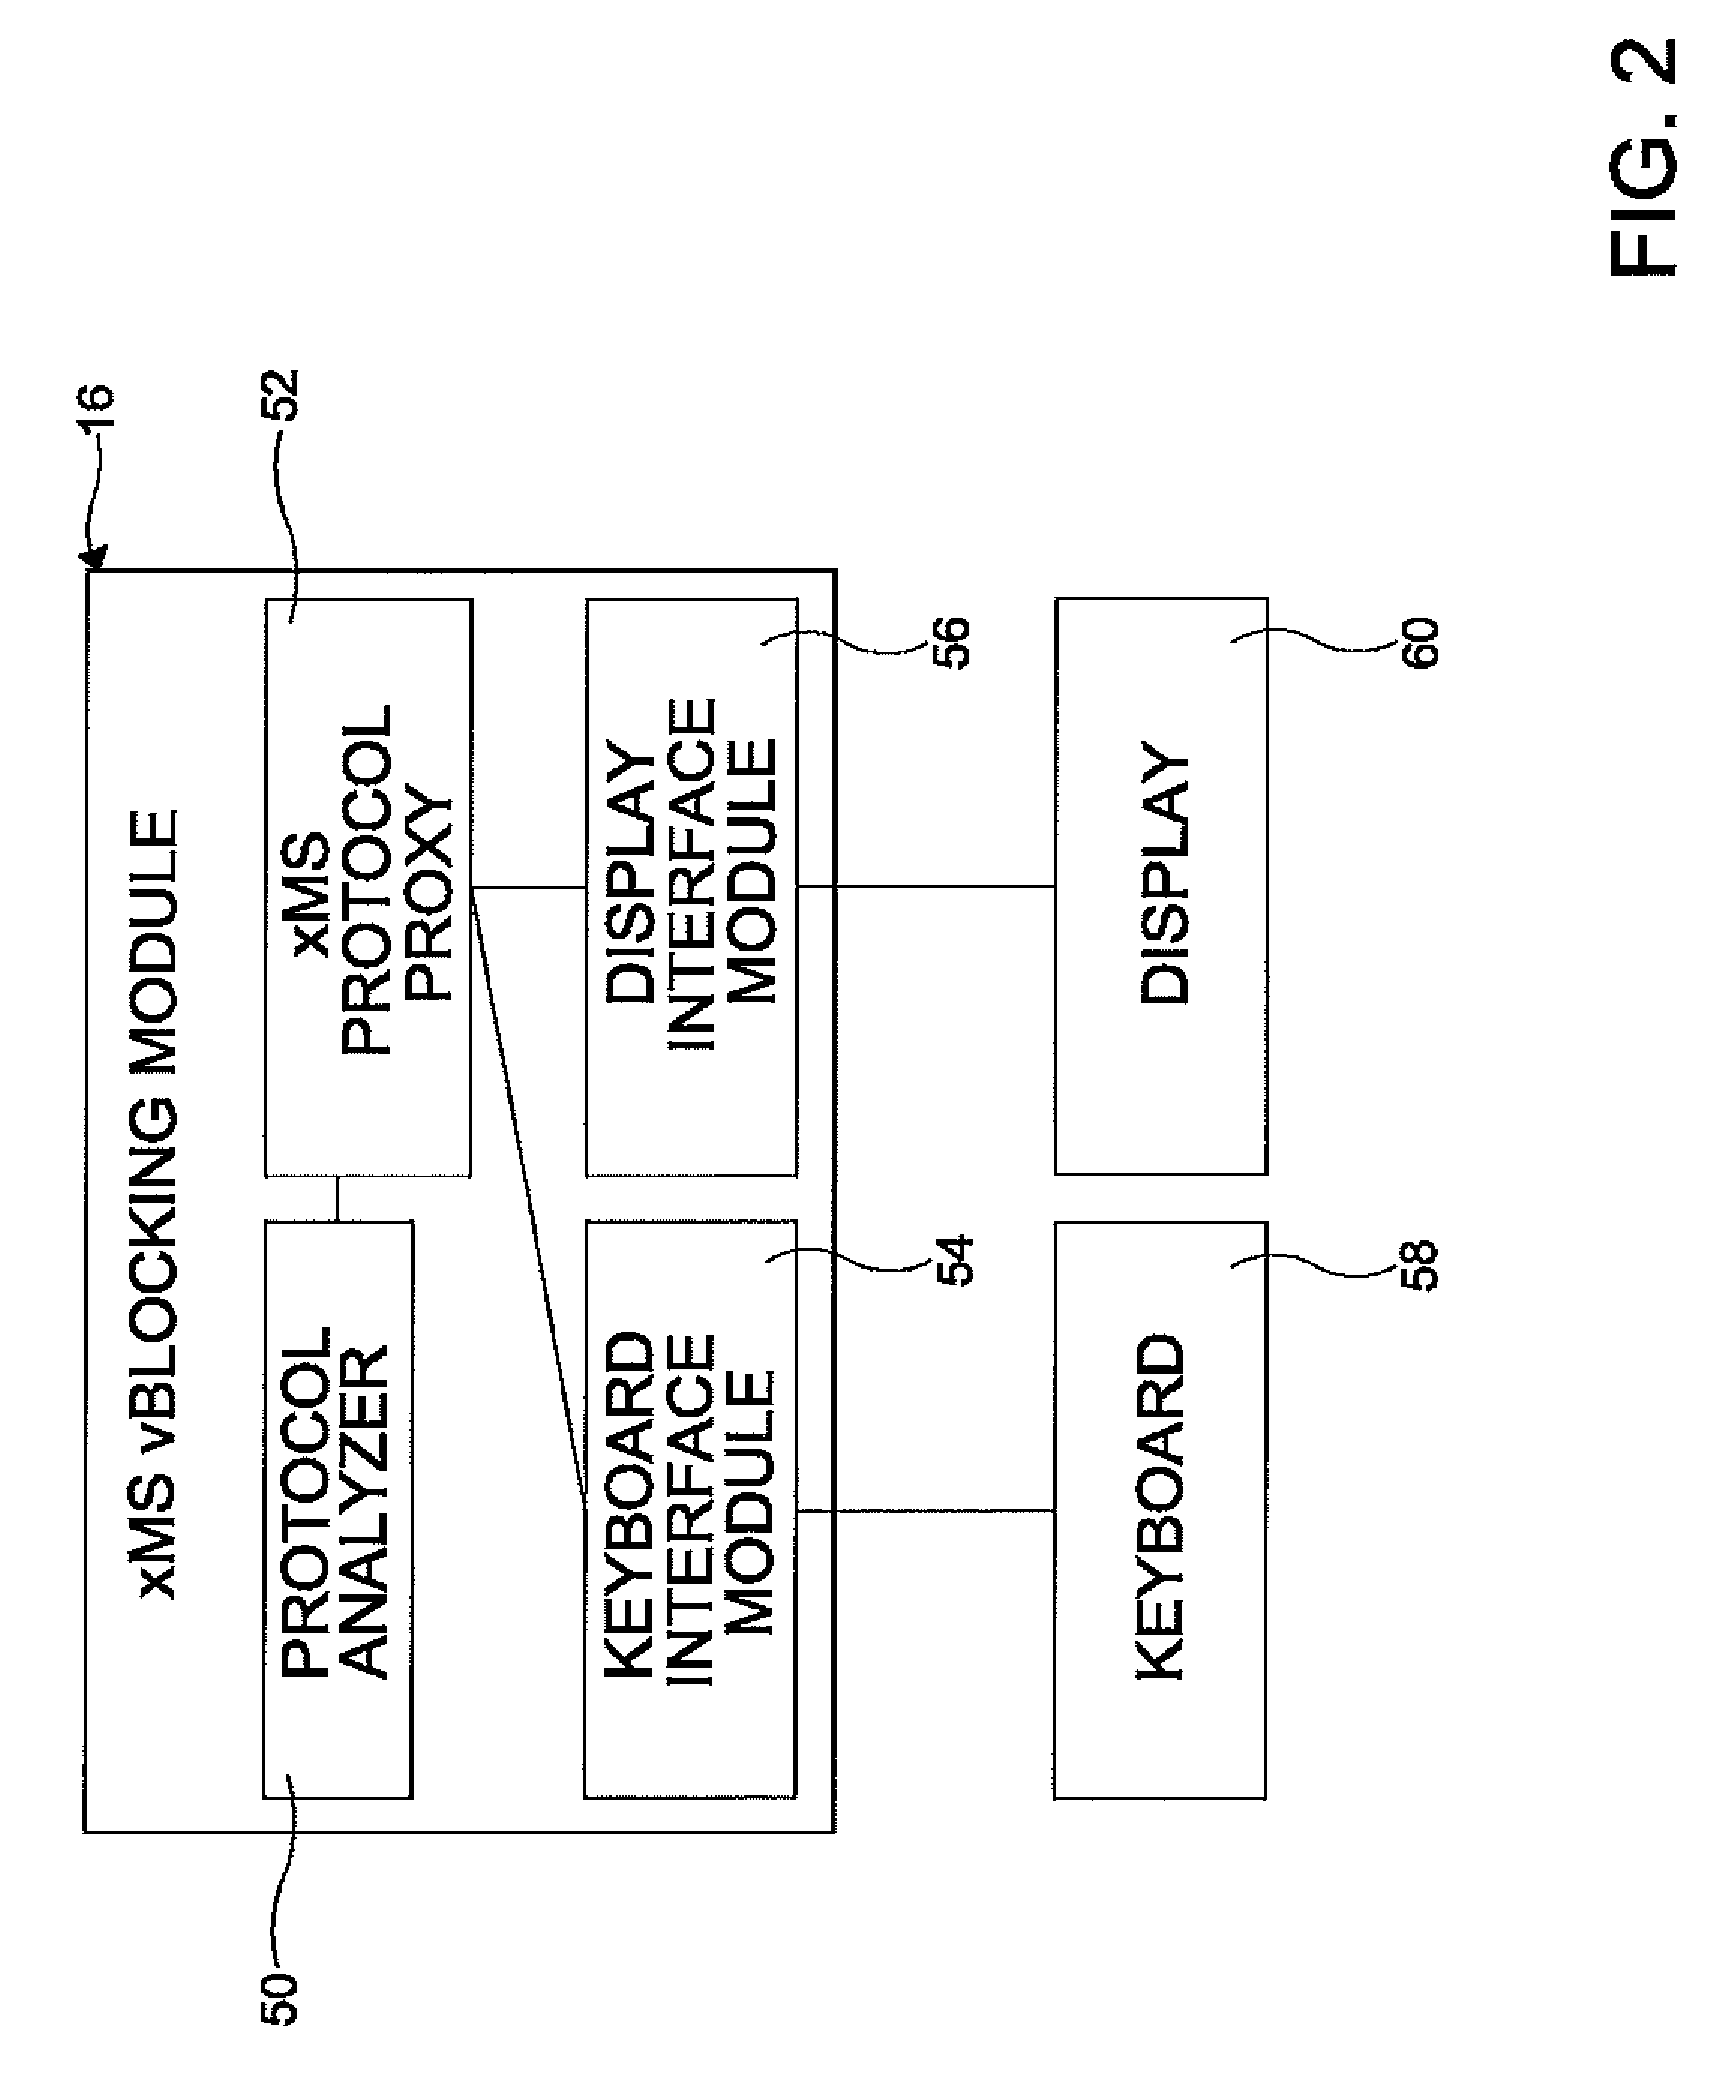 System and method for virtual blocking of non-vocal messaging services